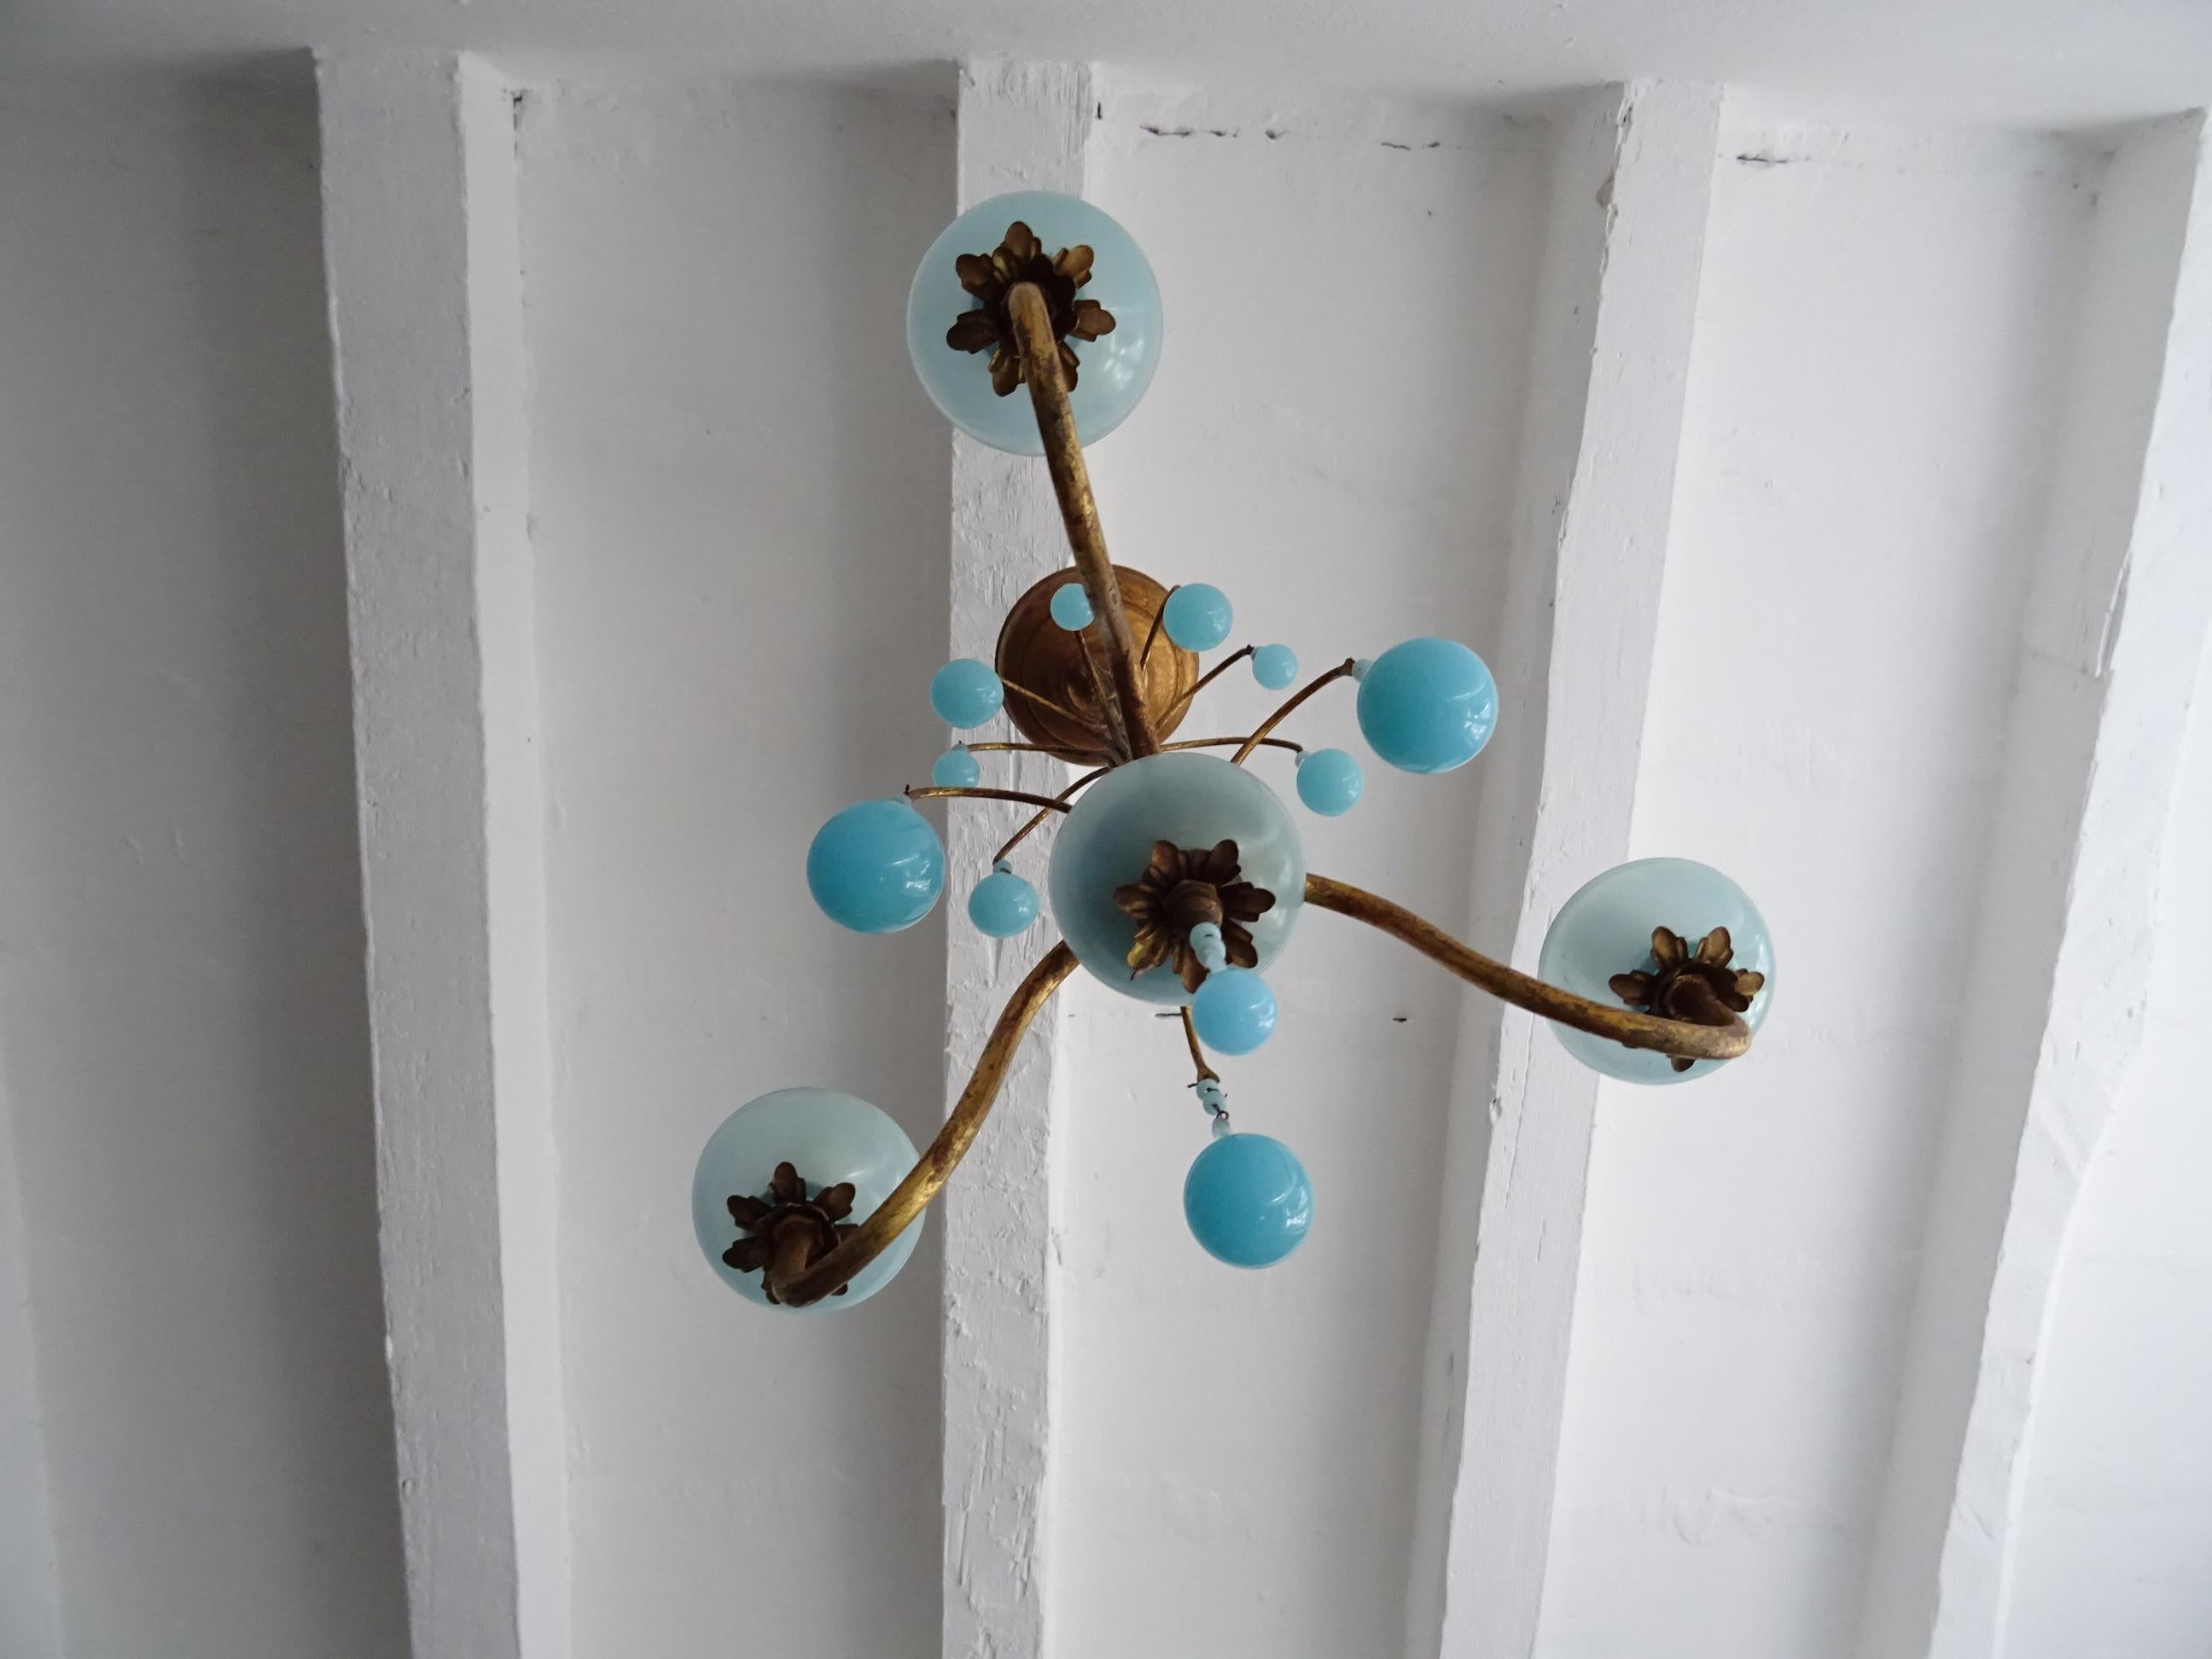 Housing 3-light sitting in blue opaline bobeches. Will be rewired with certified UL US sockets or appropriate sockets for other countries and ready to hang. Gilt metal. Murano blue opaline drops in three sizes and beads. Another blue bobeche on